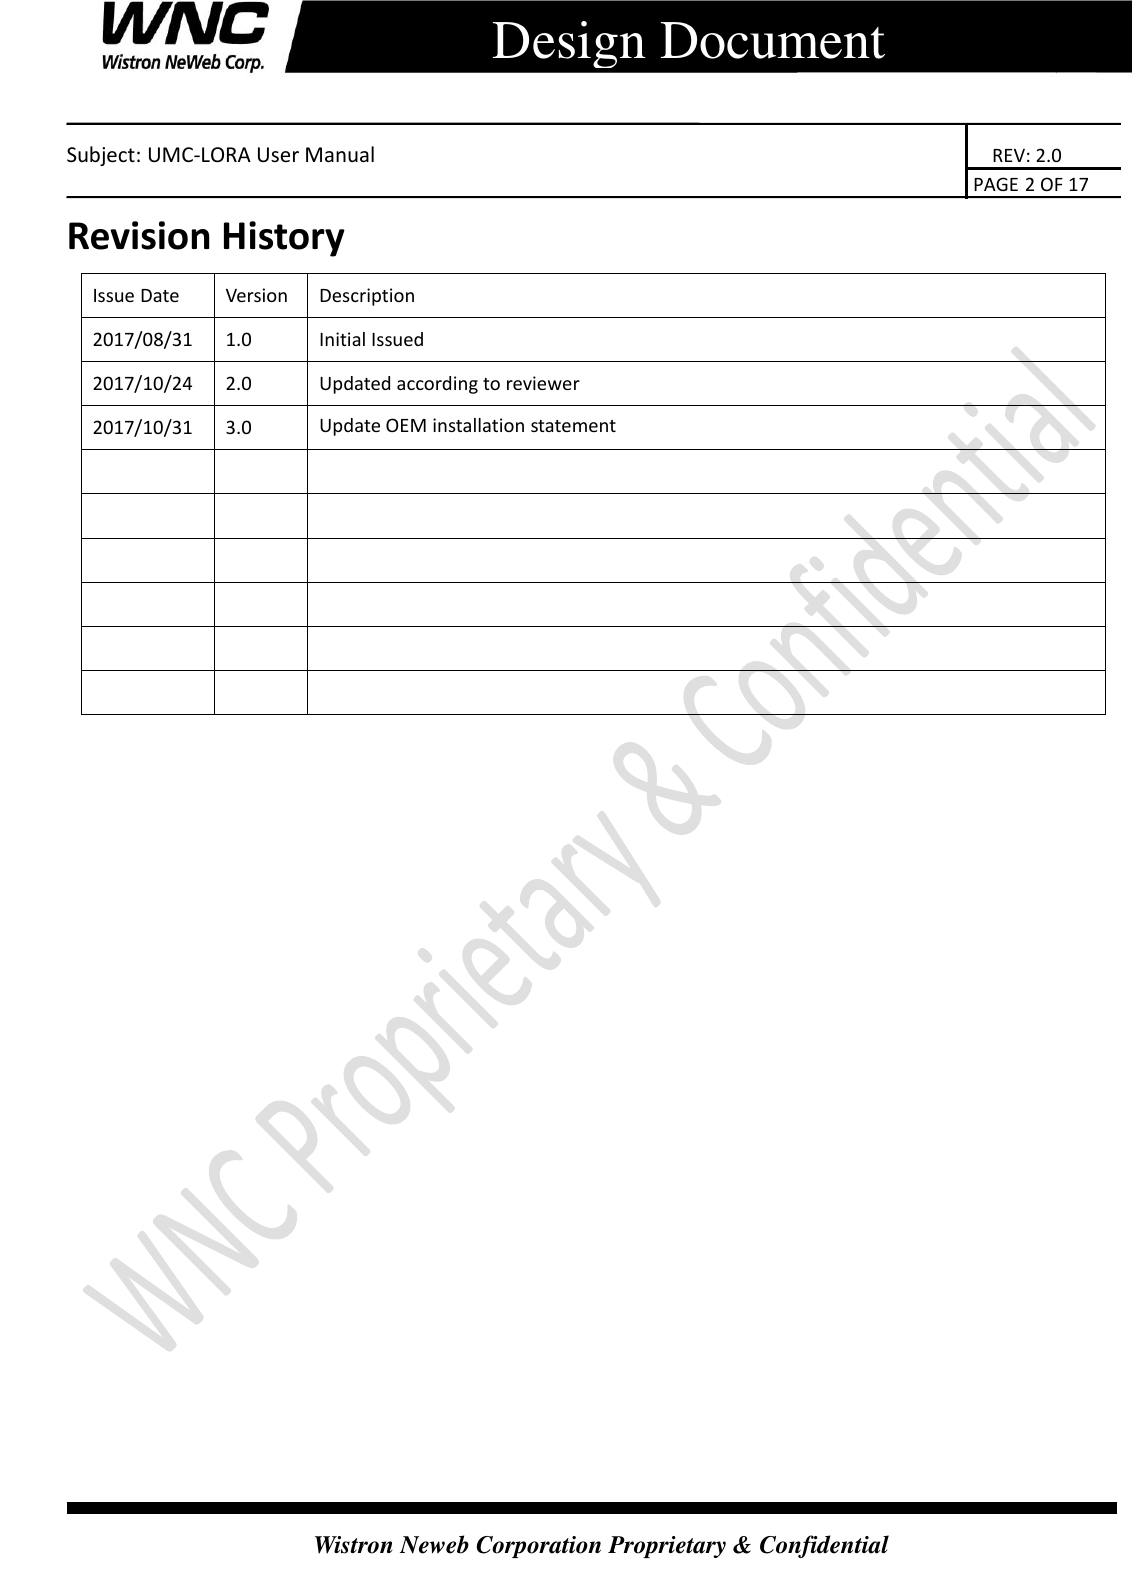    Subject: UMC-LORA User Manual                                                                      REV: 2.0                                                                                        PAGE 2 OF 17  Wistron Neweb Corporation Proprietary &amp; Confidential      Design Document Revision History Issue Date Version Description 2017/08/31 1.0 Initial Issued 2017/10/24 2.0 Updated according to reviewer 2017/10/31 3.0 Update OEM installation statement                                     